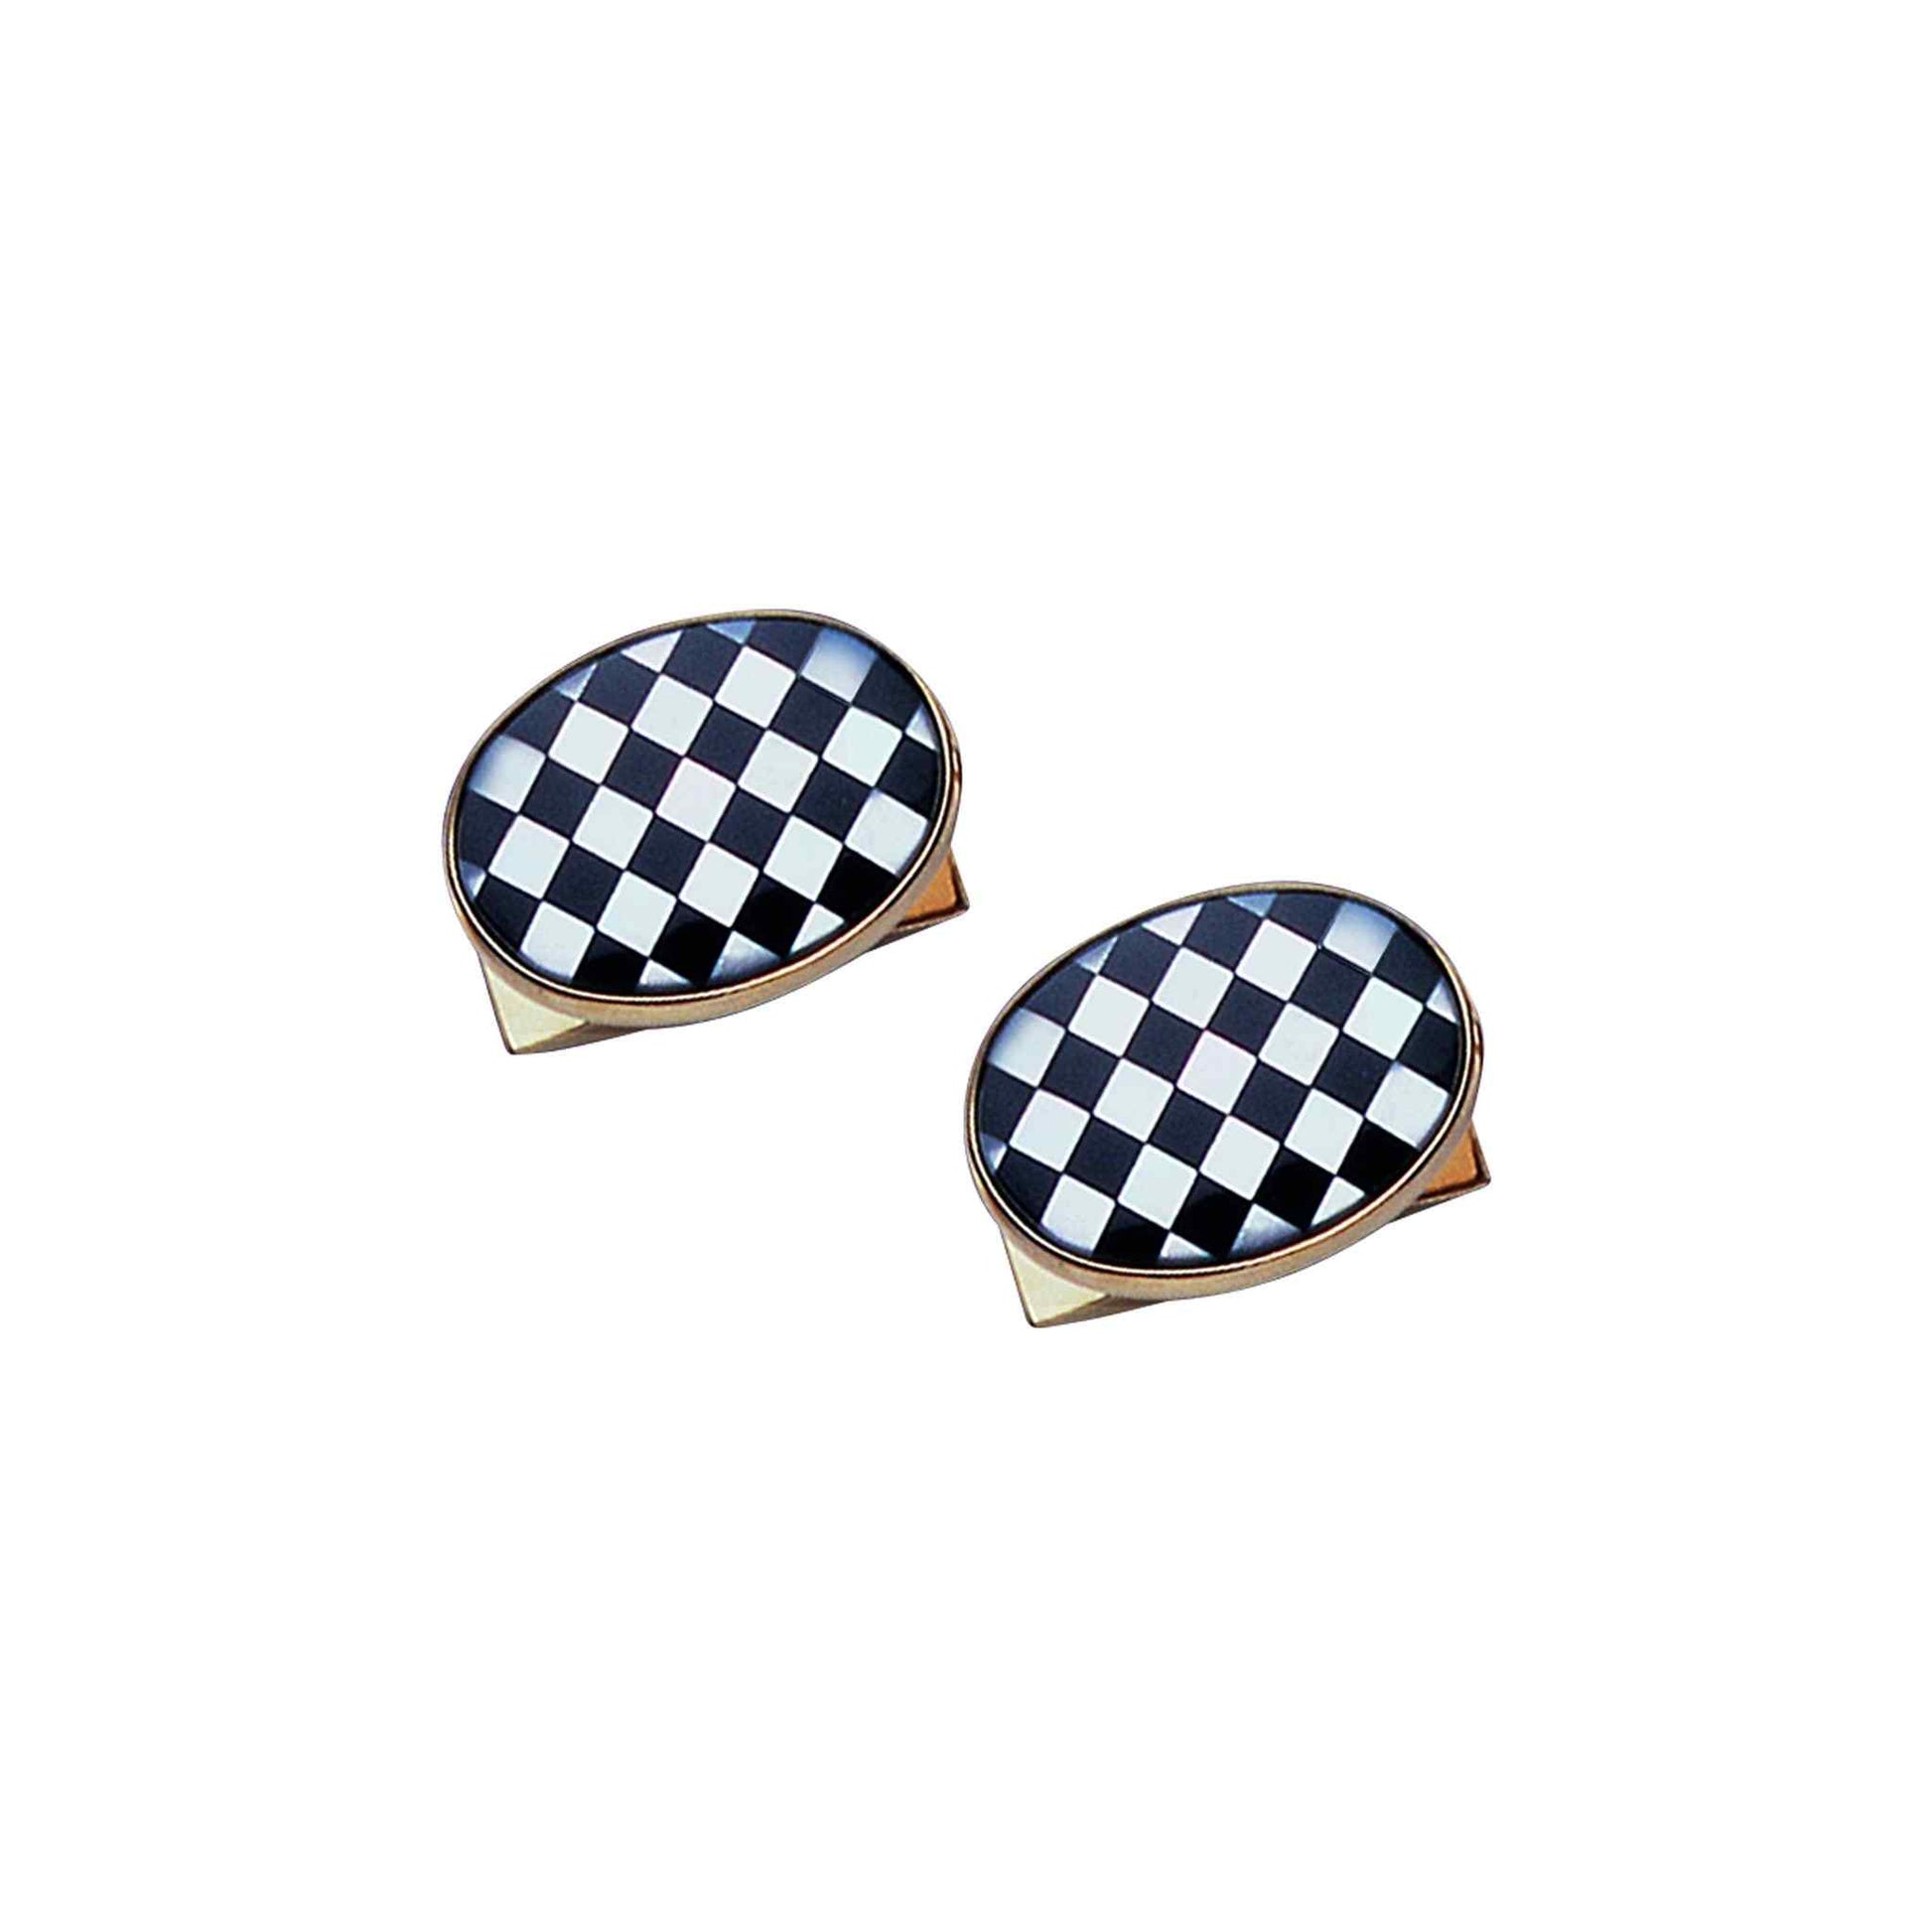 A 14k yellow gold oval 18x13mm onyx & mother of pearl cufflinks displayed on a neutral white background.